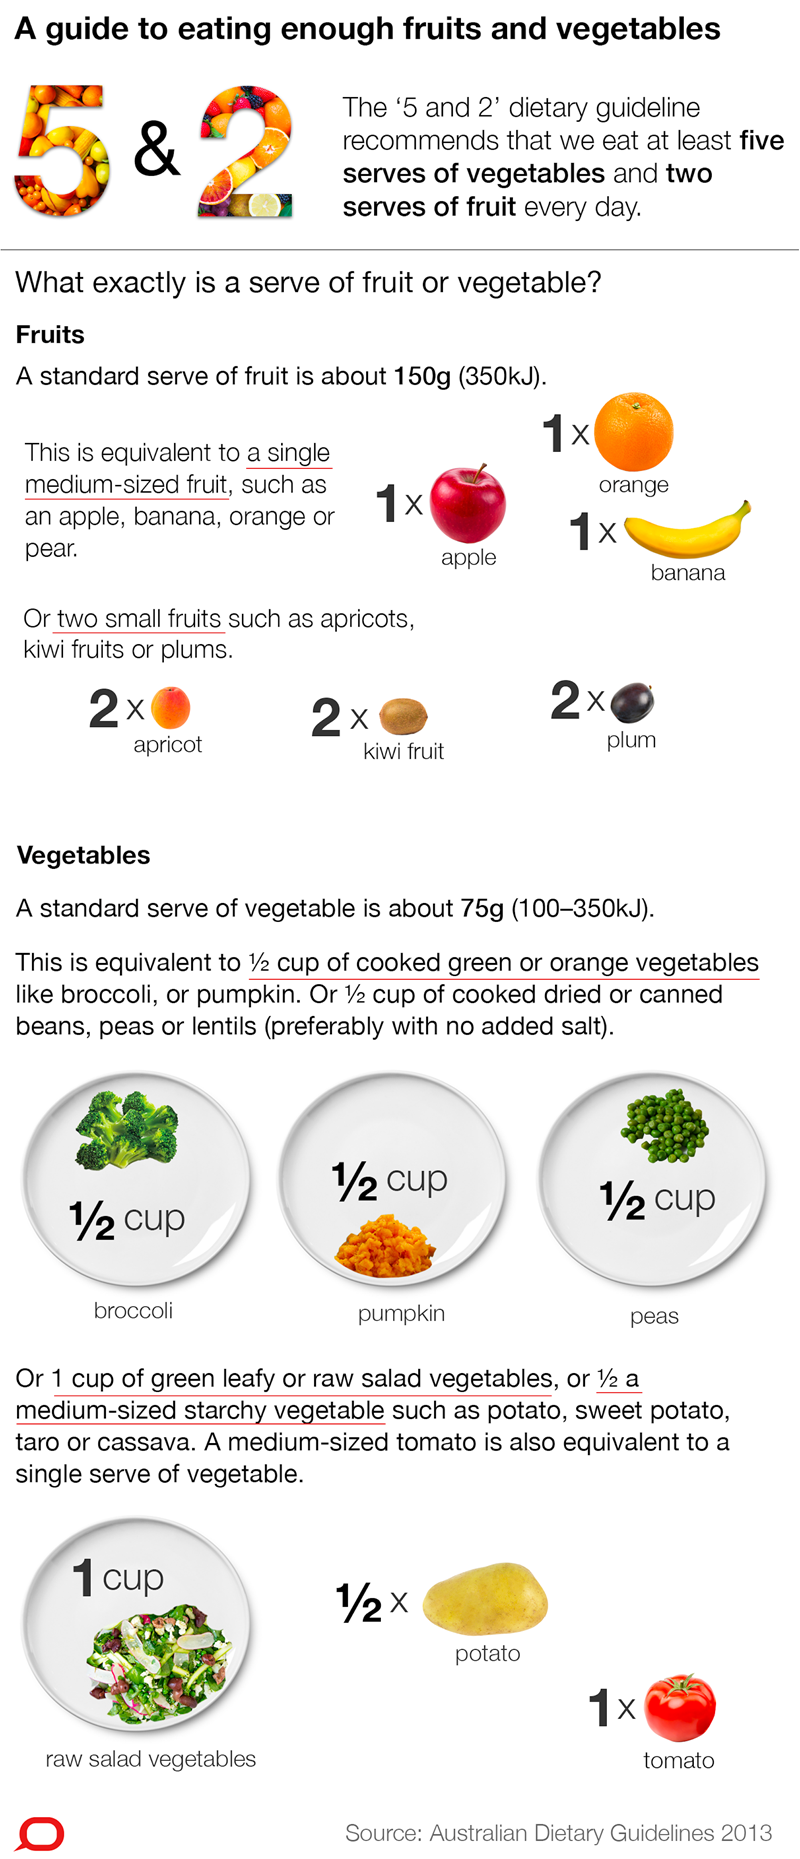 An infographic guide to eating enough fruits and vegetables.